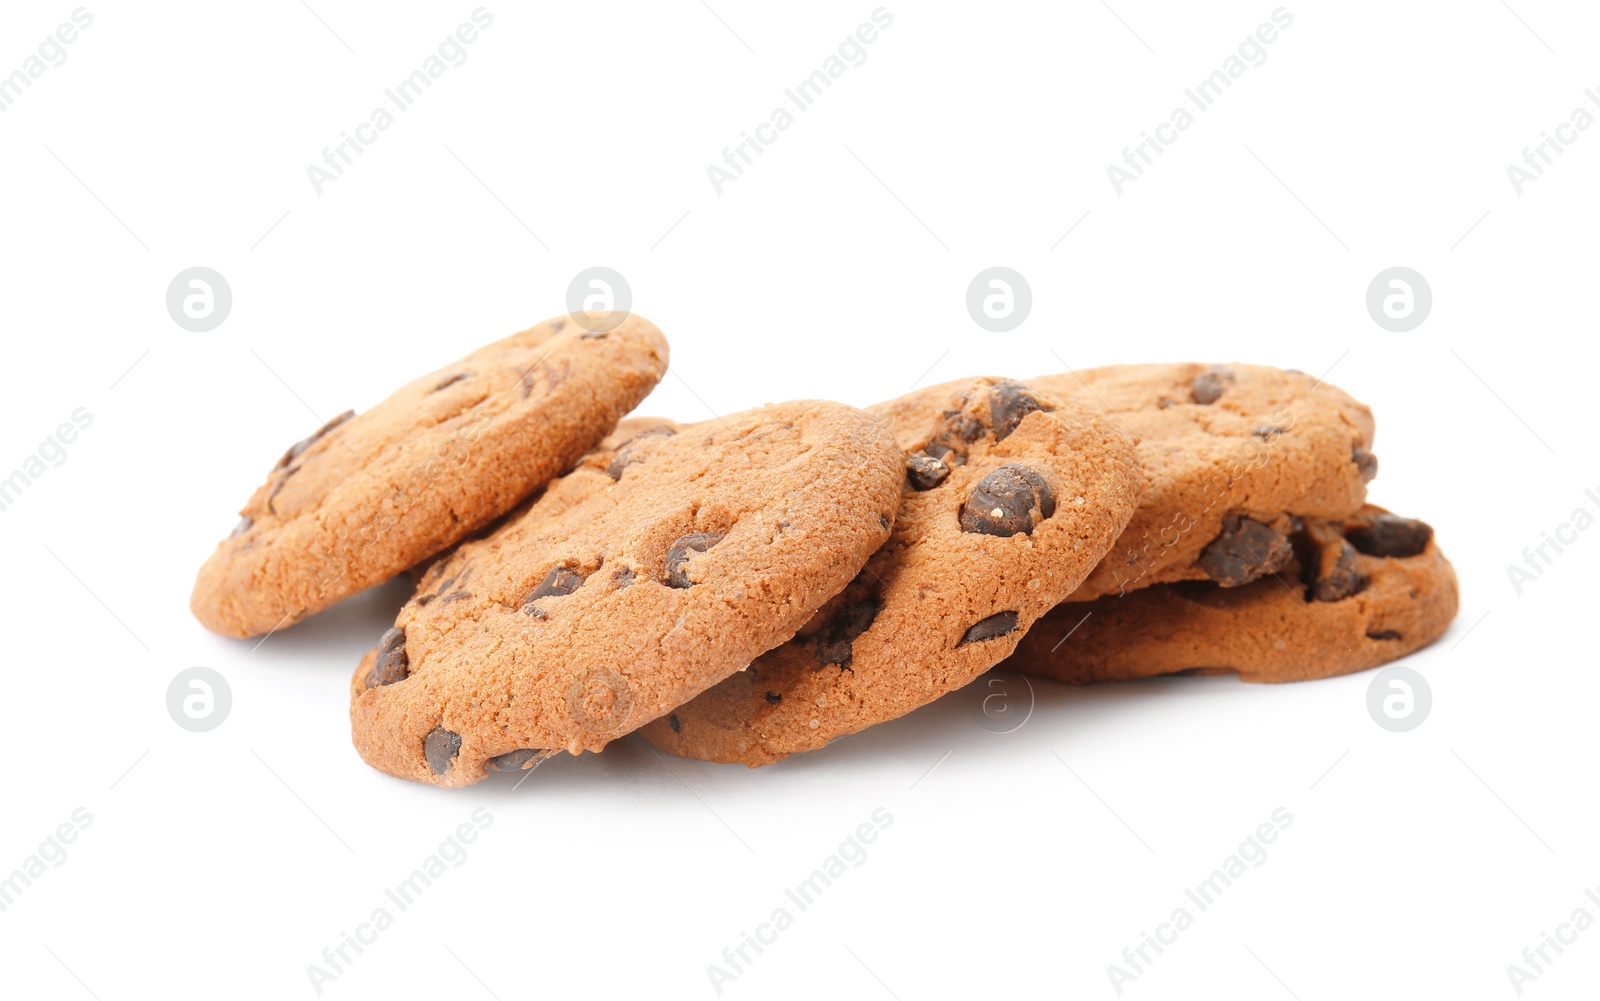 Photo of Pile of tasty chocolate chip cookies on white background